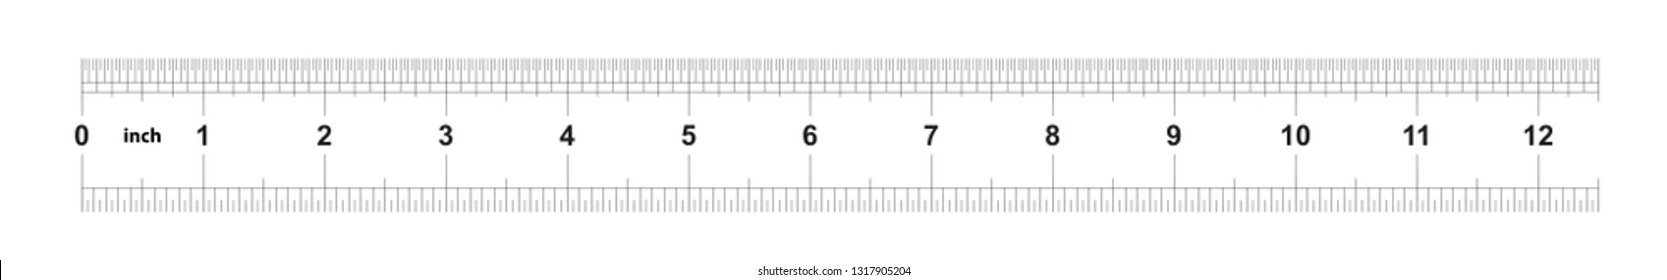 give me a ruler